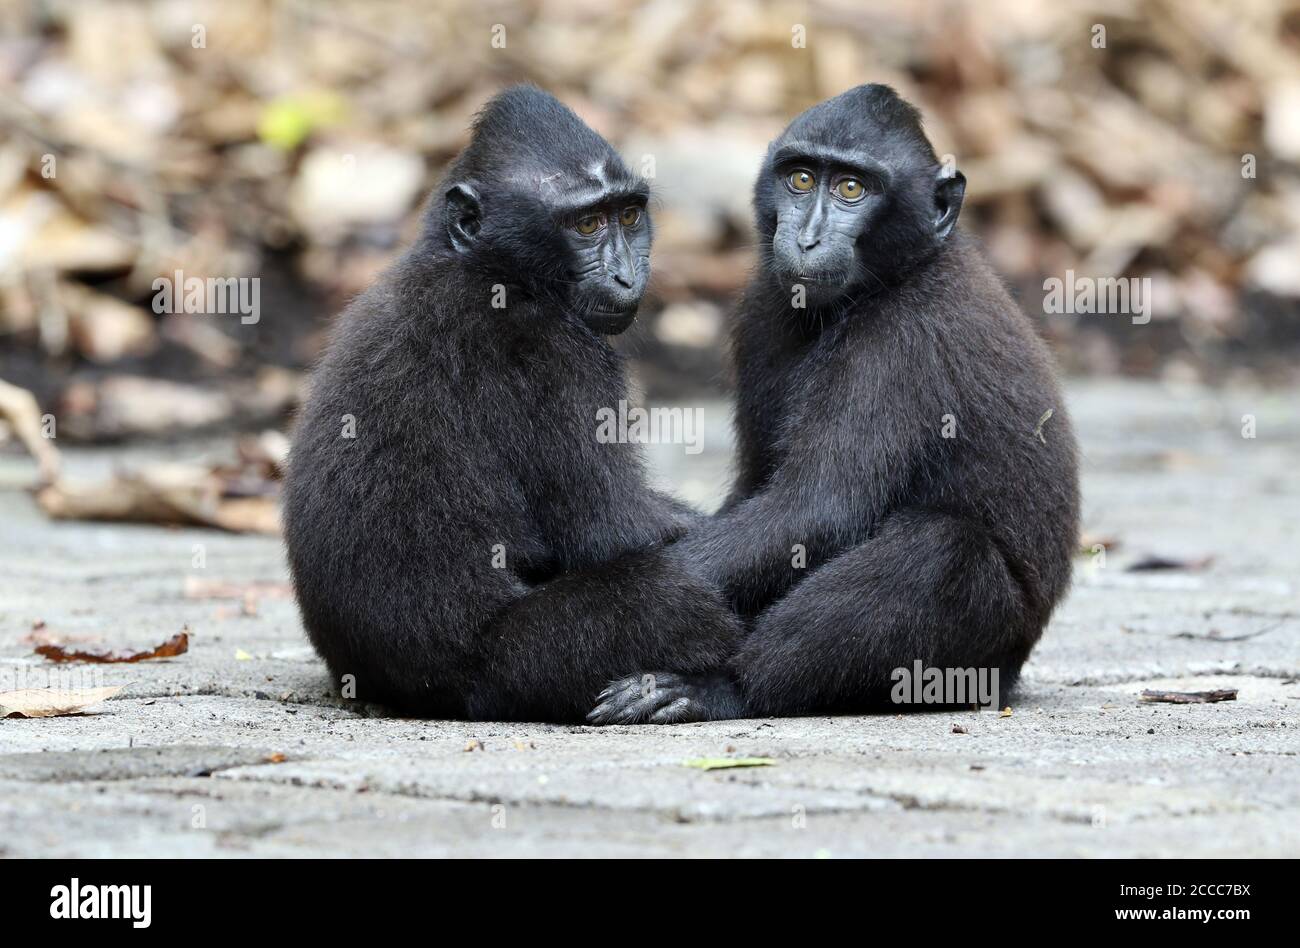 Celebes crested or Sulawesi crested macaque (Macaca nigra) young playing hard on the road Stock Photo